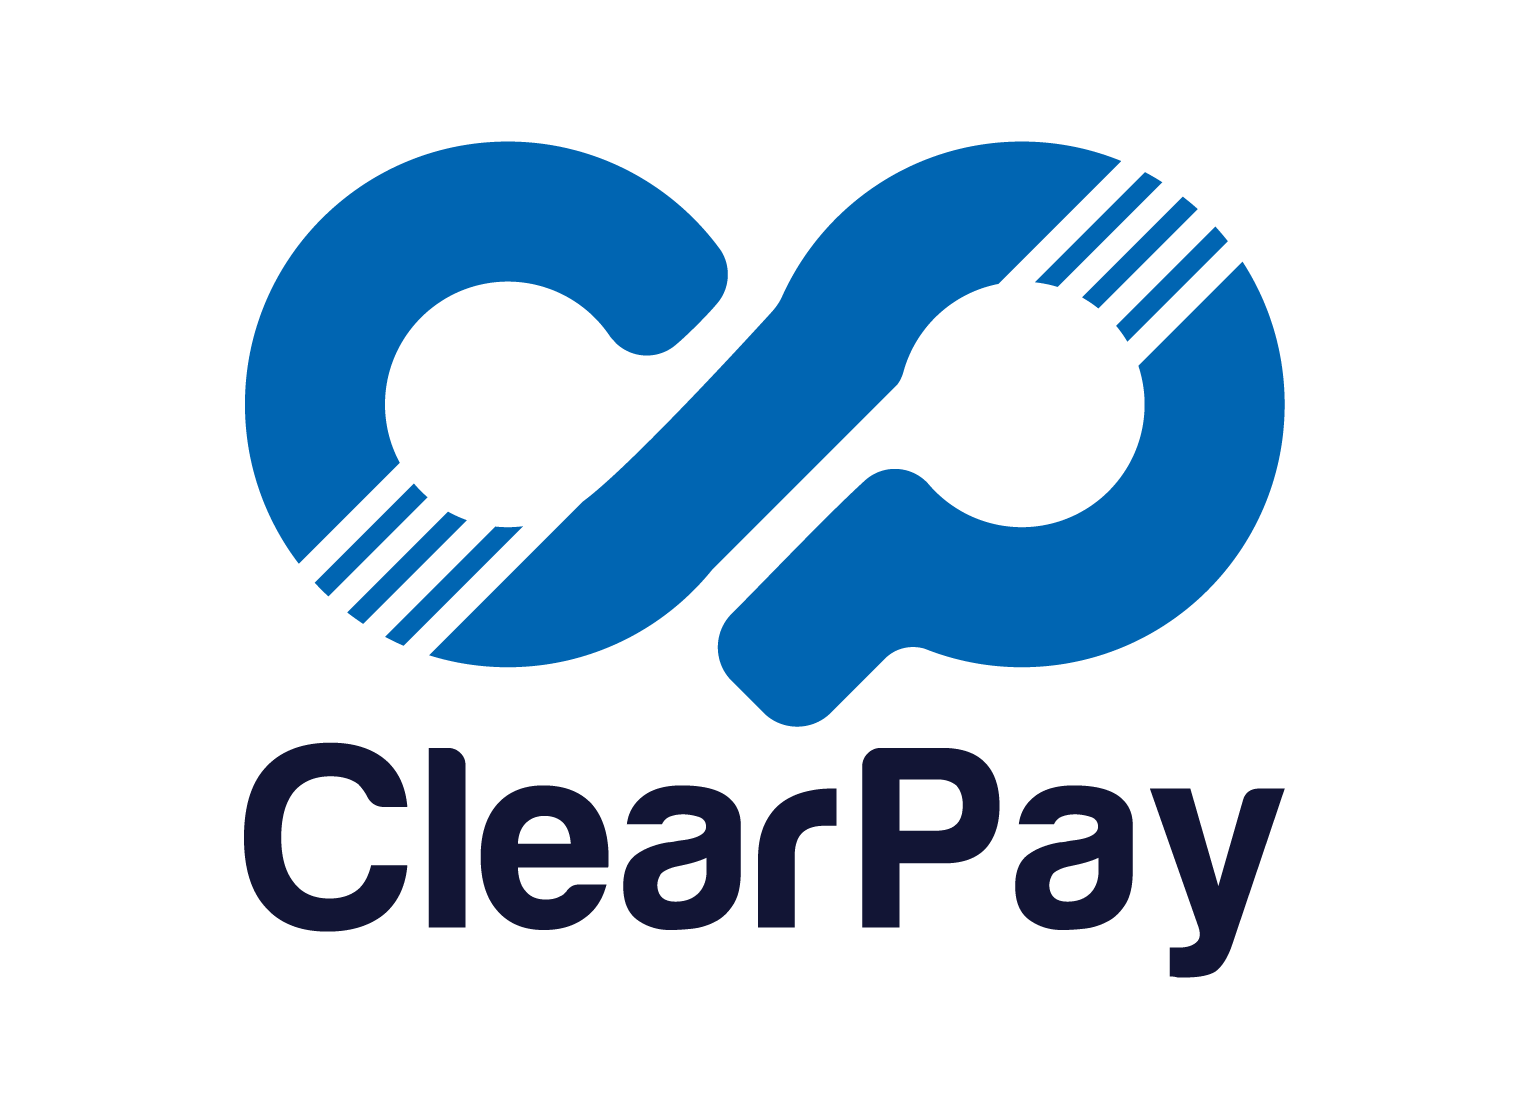 final logo Clearpay-01